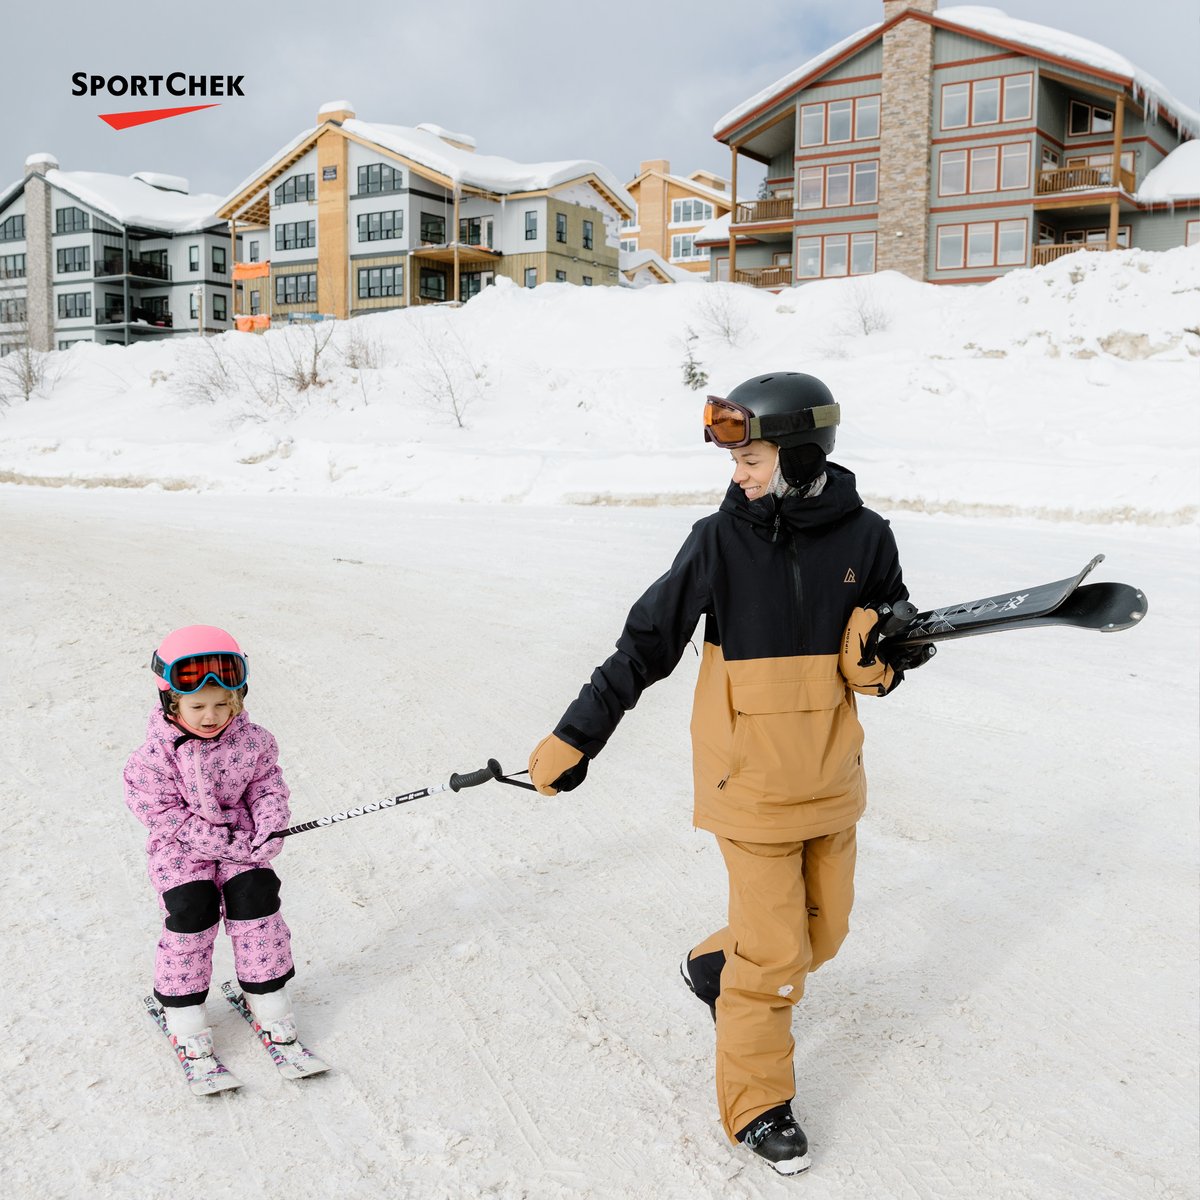 Winter adventures are better when shared with loved ones so strap on your boots, grab your poles, and hit the slopes with your little ski buddies.❄️⛷️ Find everything you need at sportchek.ca